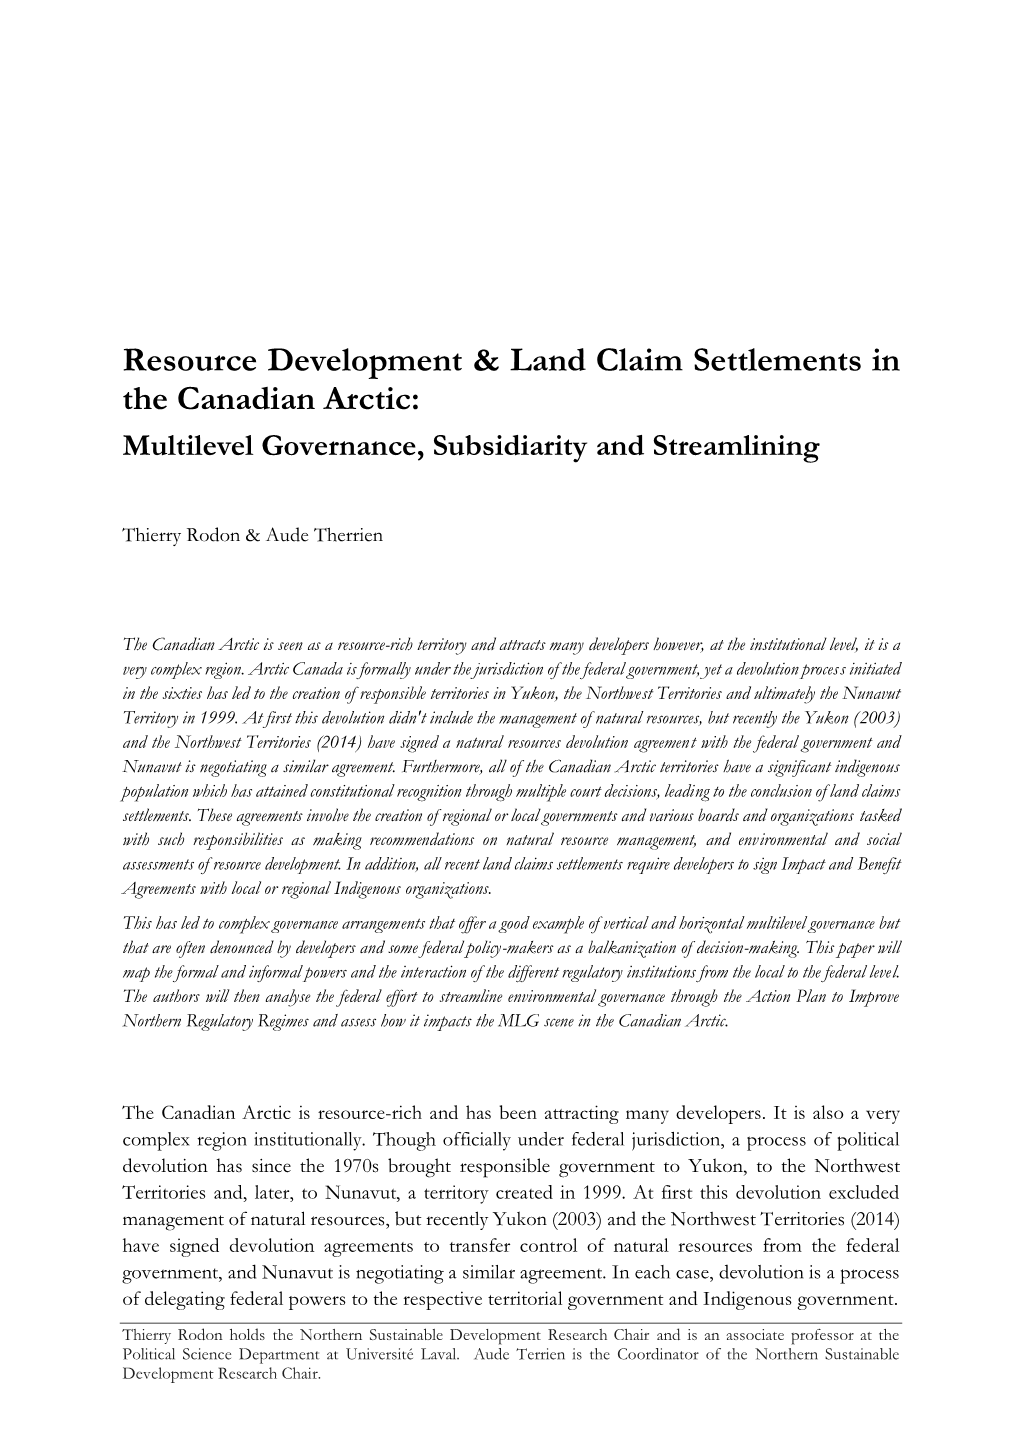 Resource Development & Land Claim Settlements in the Canadian Arctic